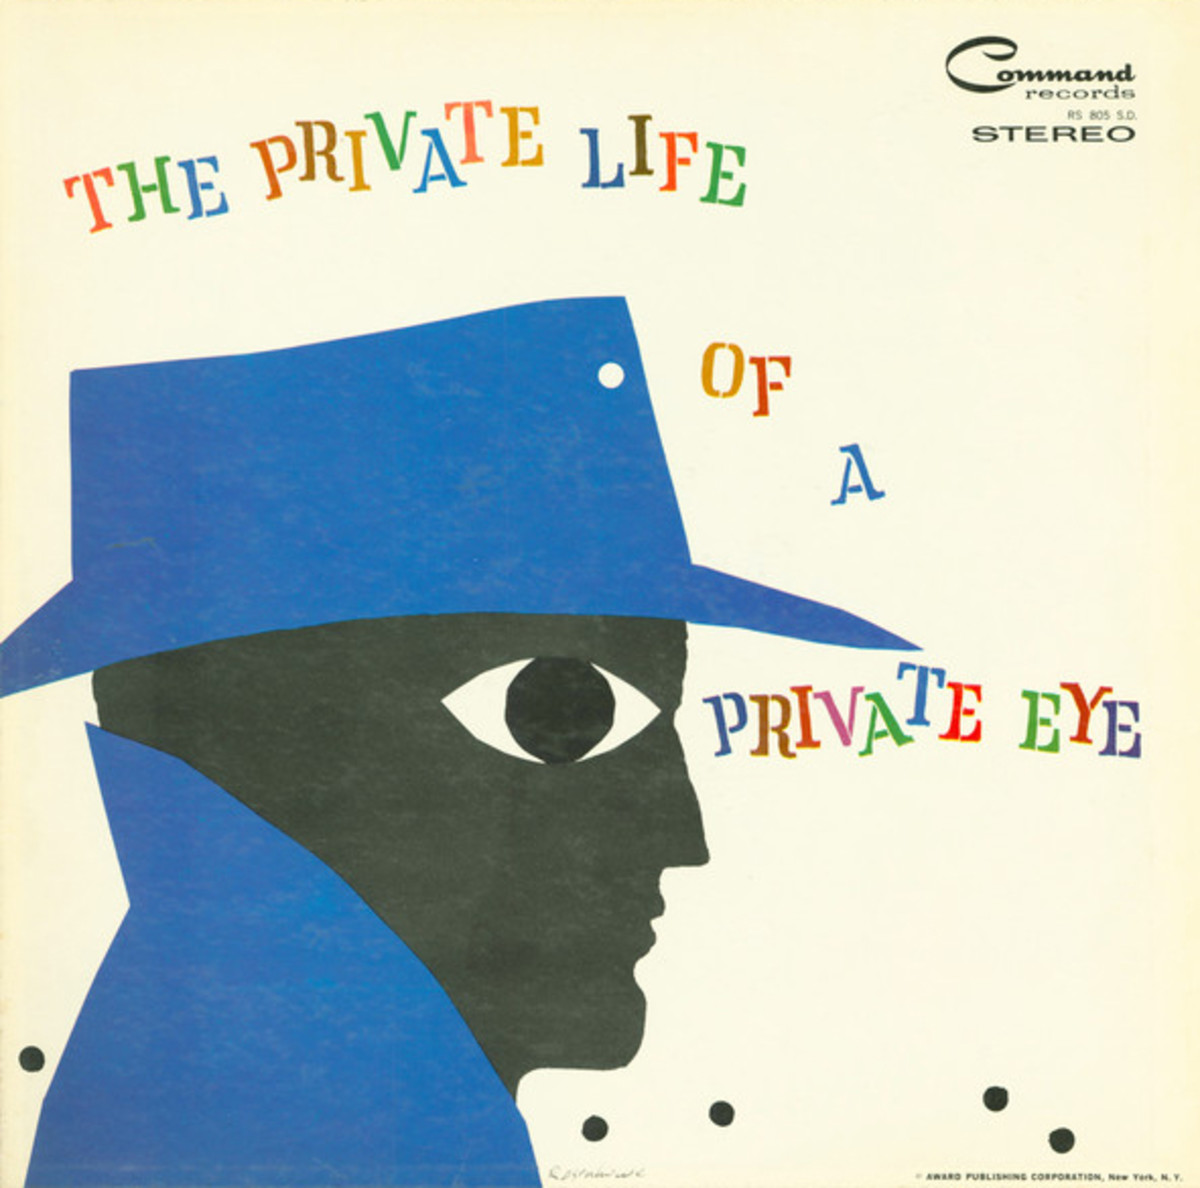 The Private Life of a Private Eye